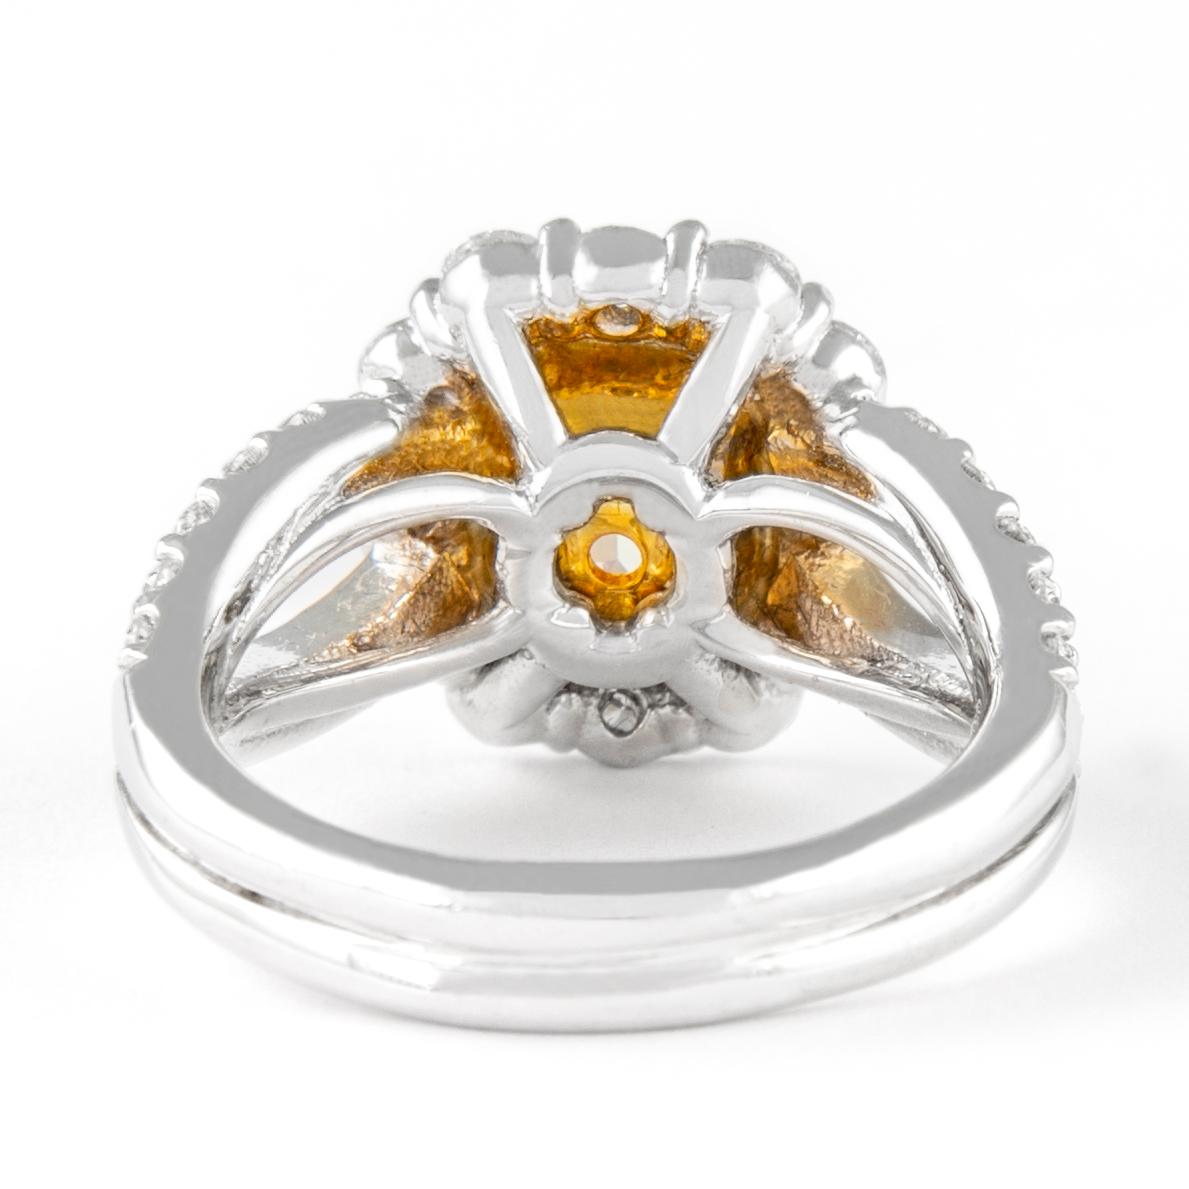 Alexander 3.34ctt Fancy Yellow Cushion Diamond with Halo Ring 18k Two Tone In New Condition For Sale In BEVERLY HILLS, CA